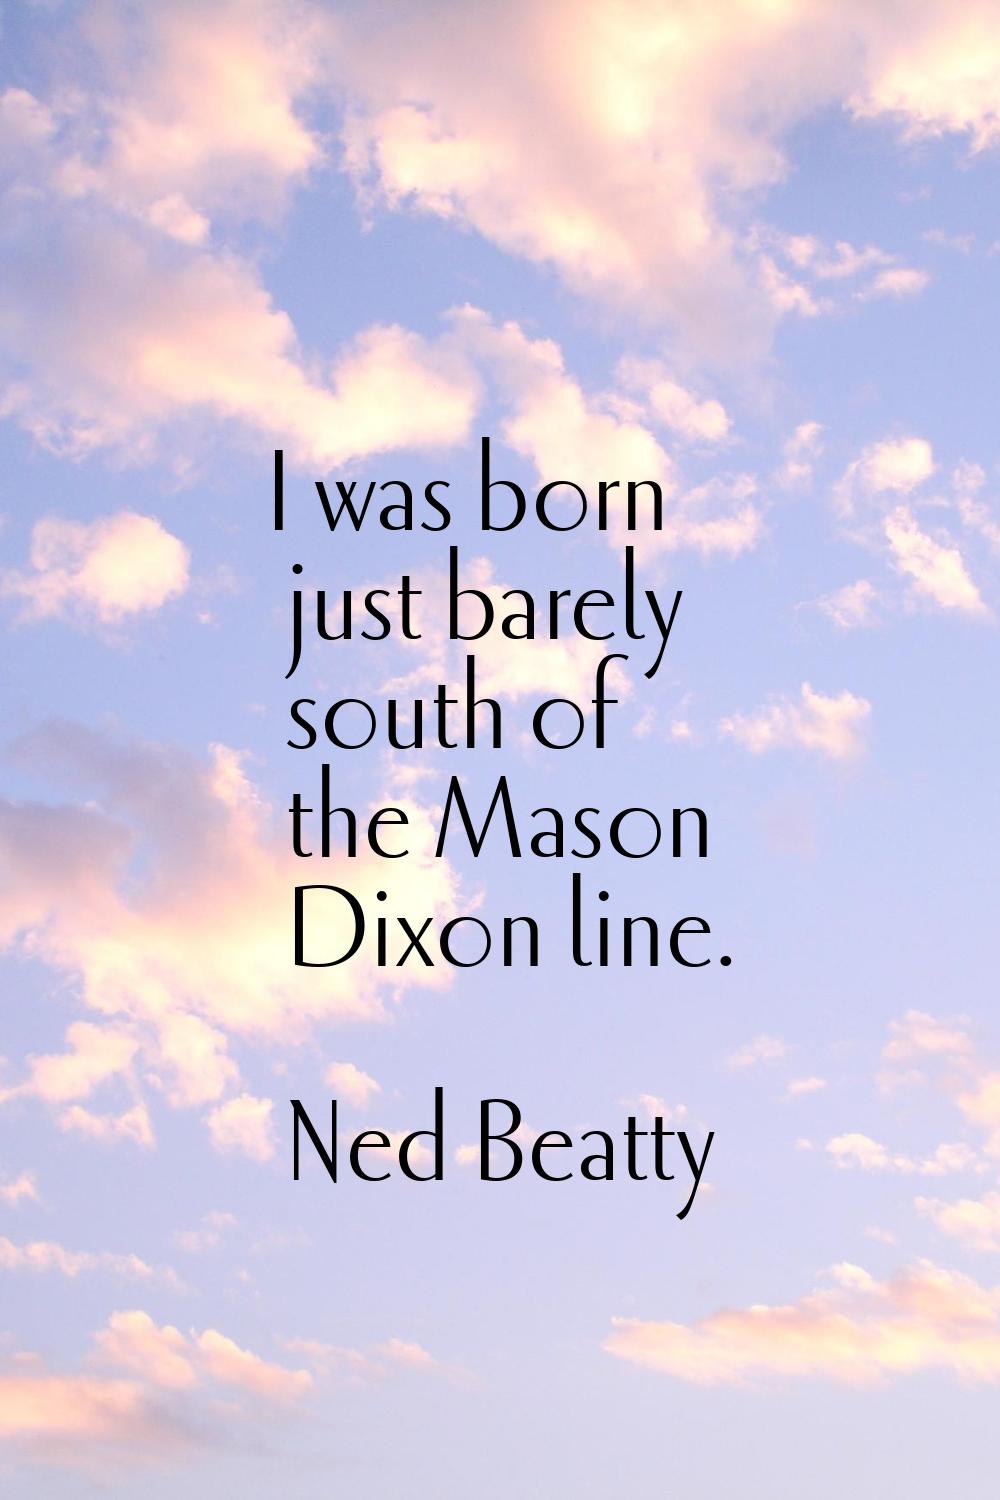 I was born just barely south of the Mason Dixon line.